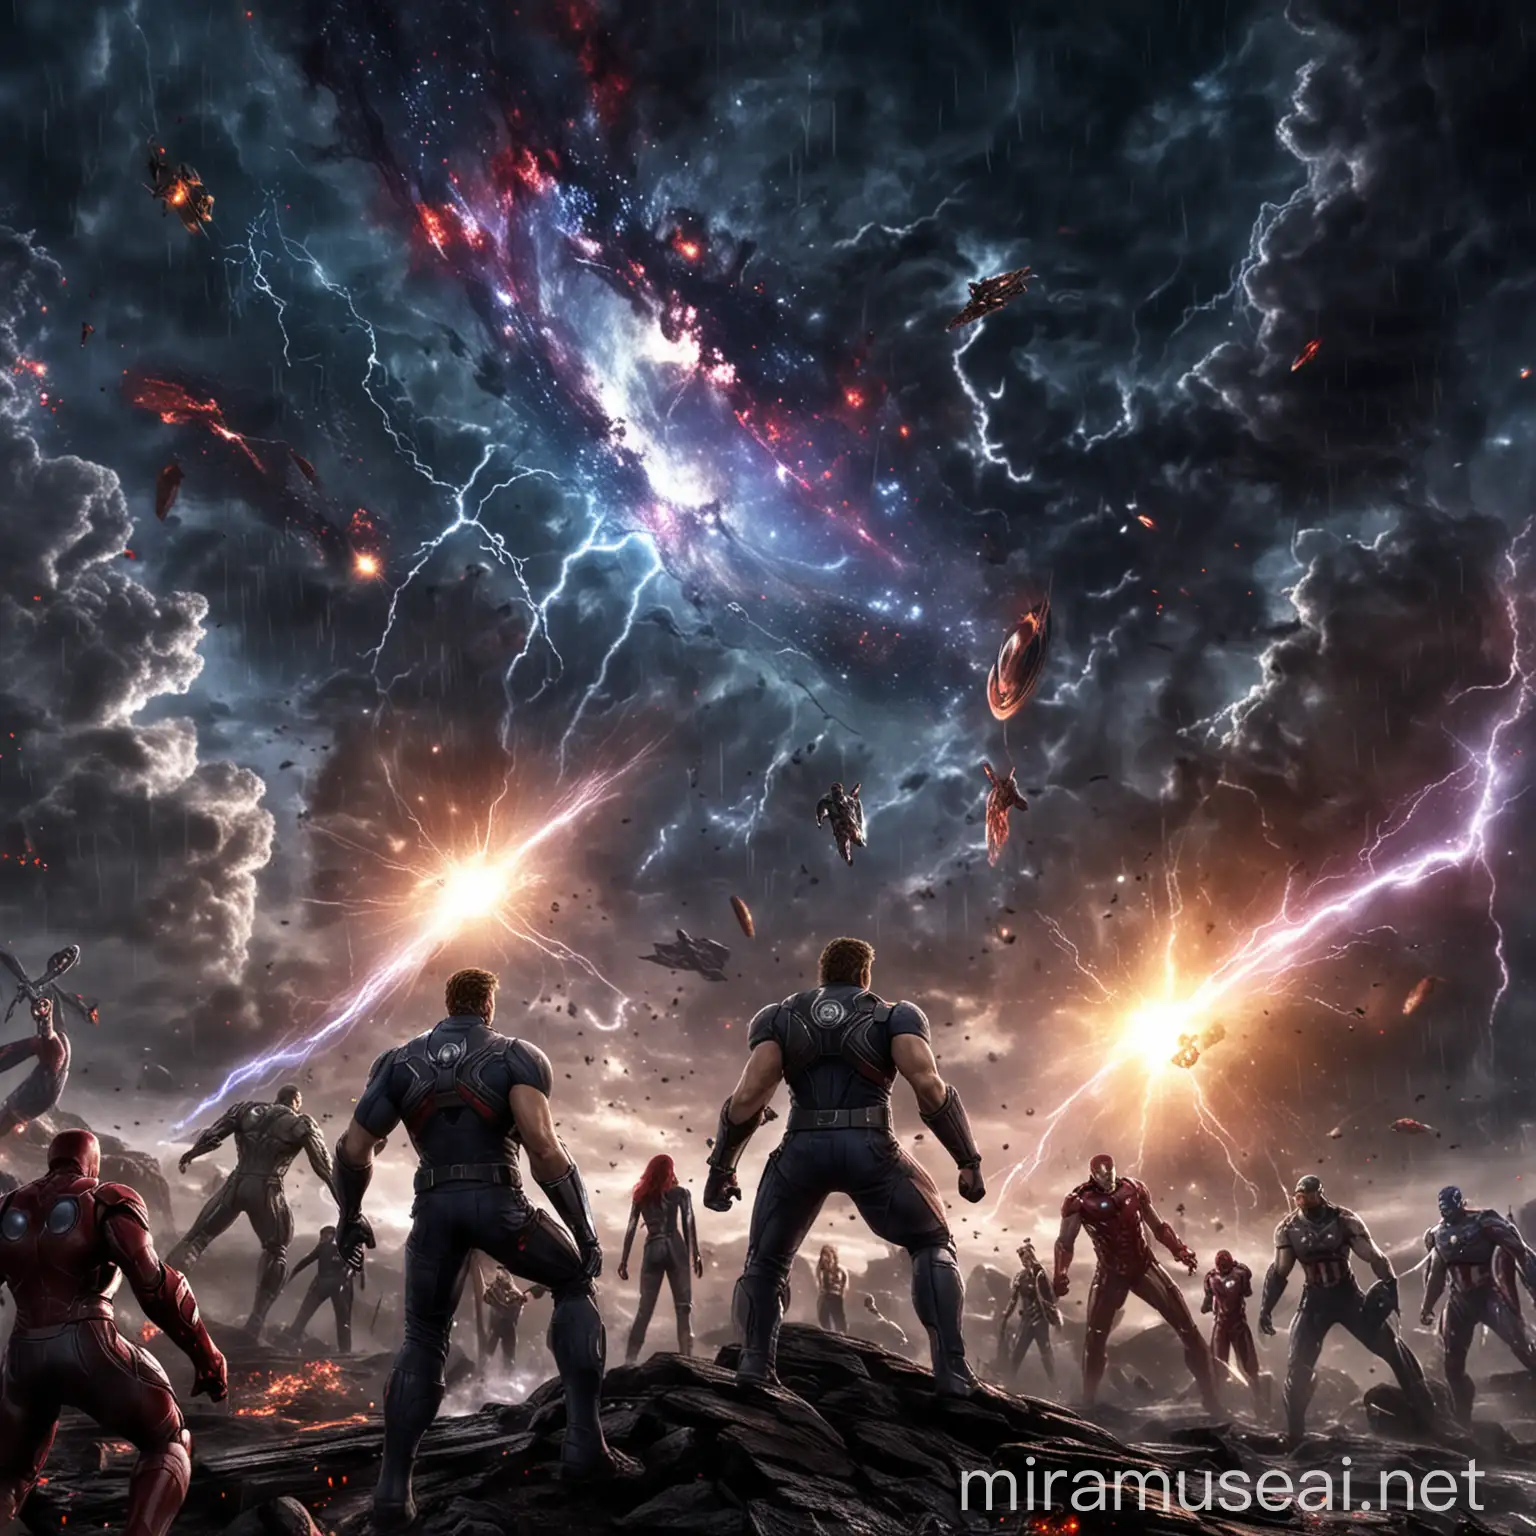 Epic Battle of The Avengers Amidst a Cosmic Storm